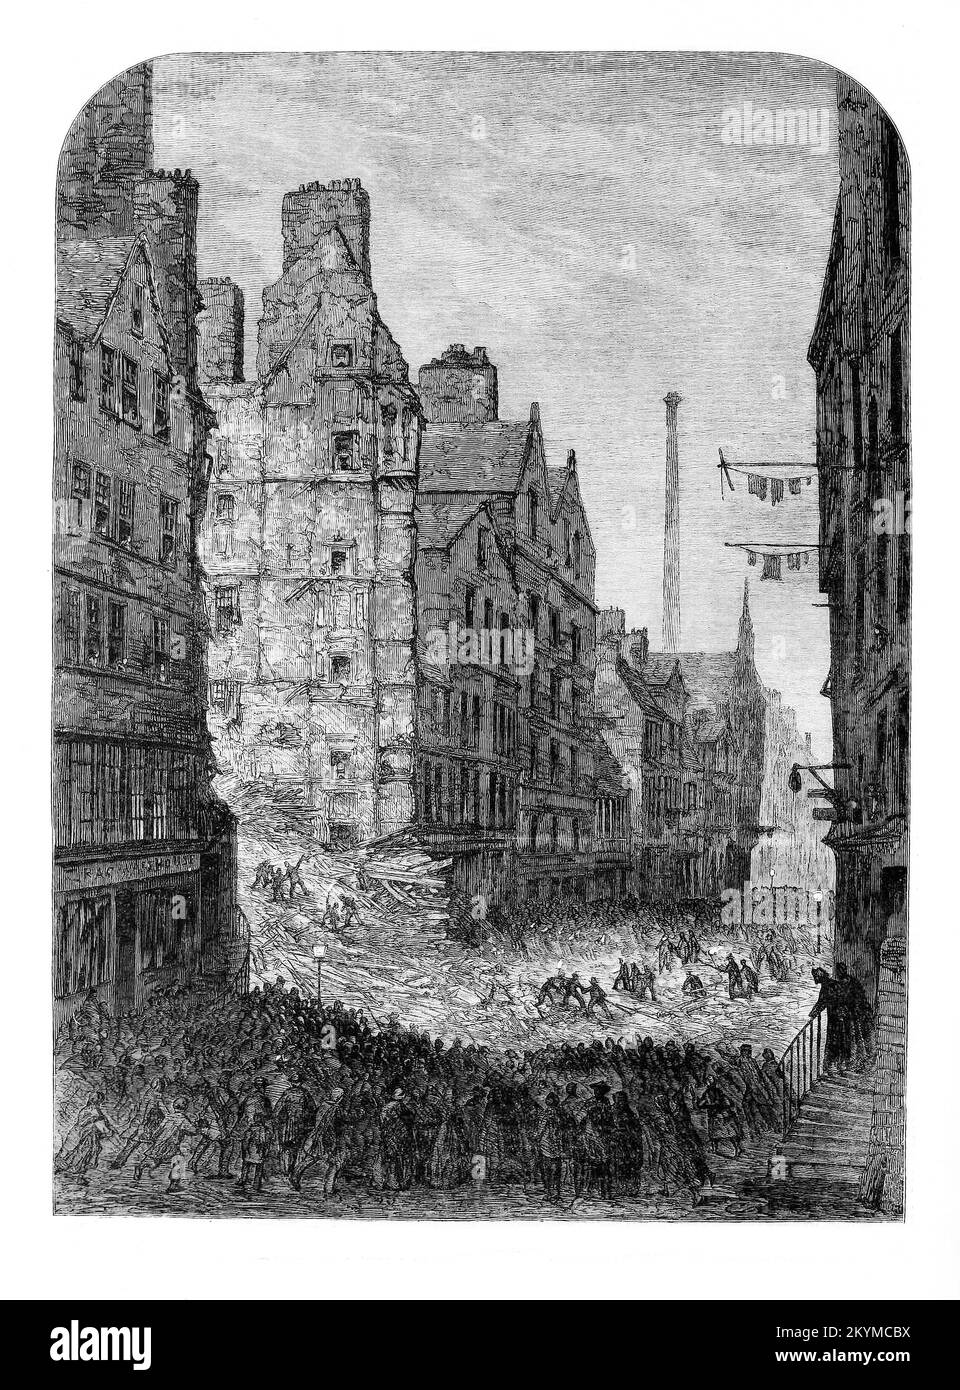 The collapse of an Edinburgh tenement with loss of life in November 1861. From 77 occupants, 35 perished or died in hospital from their injuries. The 250 years old  seven-storey building comprised mostly of timber, which toppled that fateful night was located in the heart of Edinburgh’s densely-populated Old Town, on the north side of the High Street.The City Improvement Act was passed in 1867, and by the close of the 19th century much of the Old Town’s medieval housing had disappeared. Stock Photo